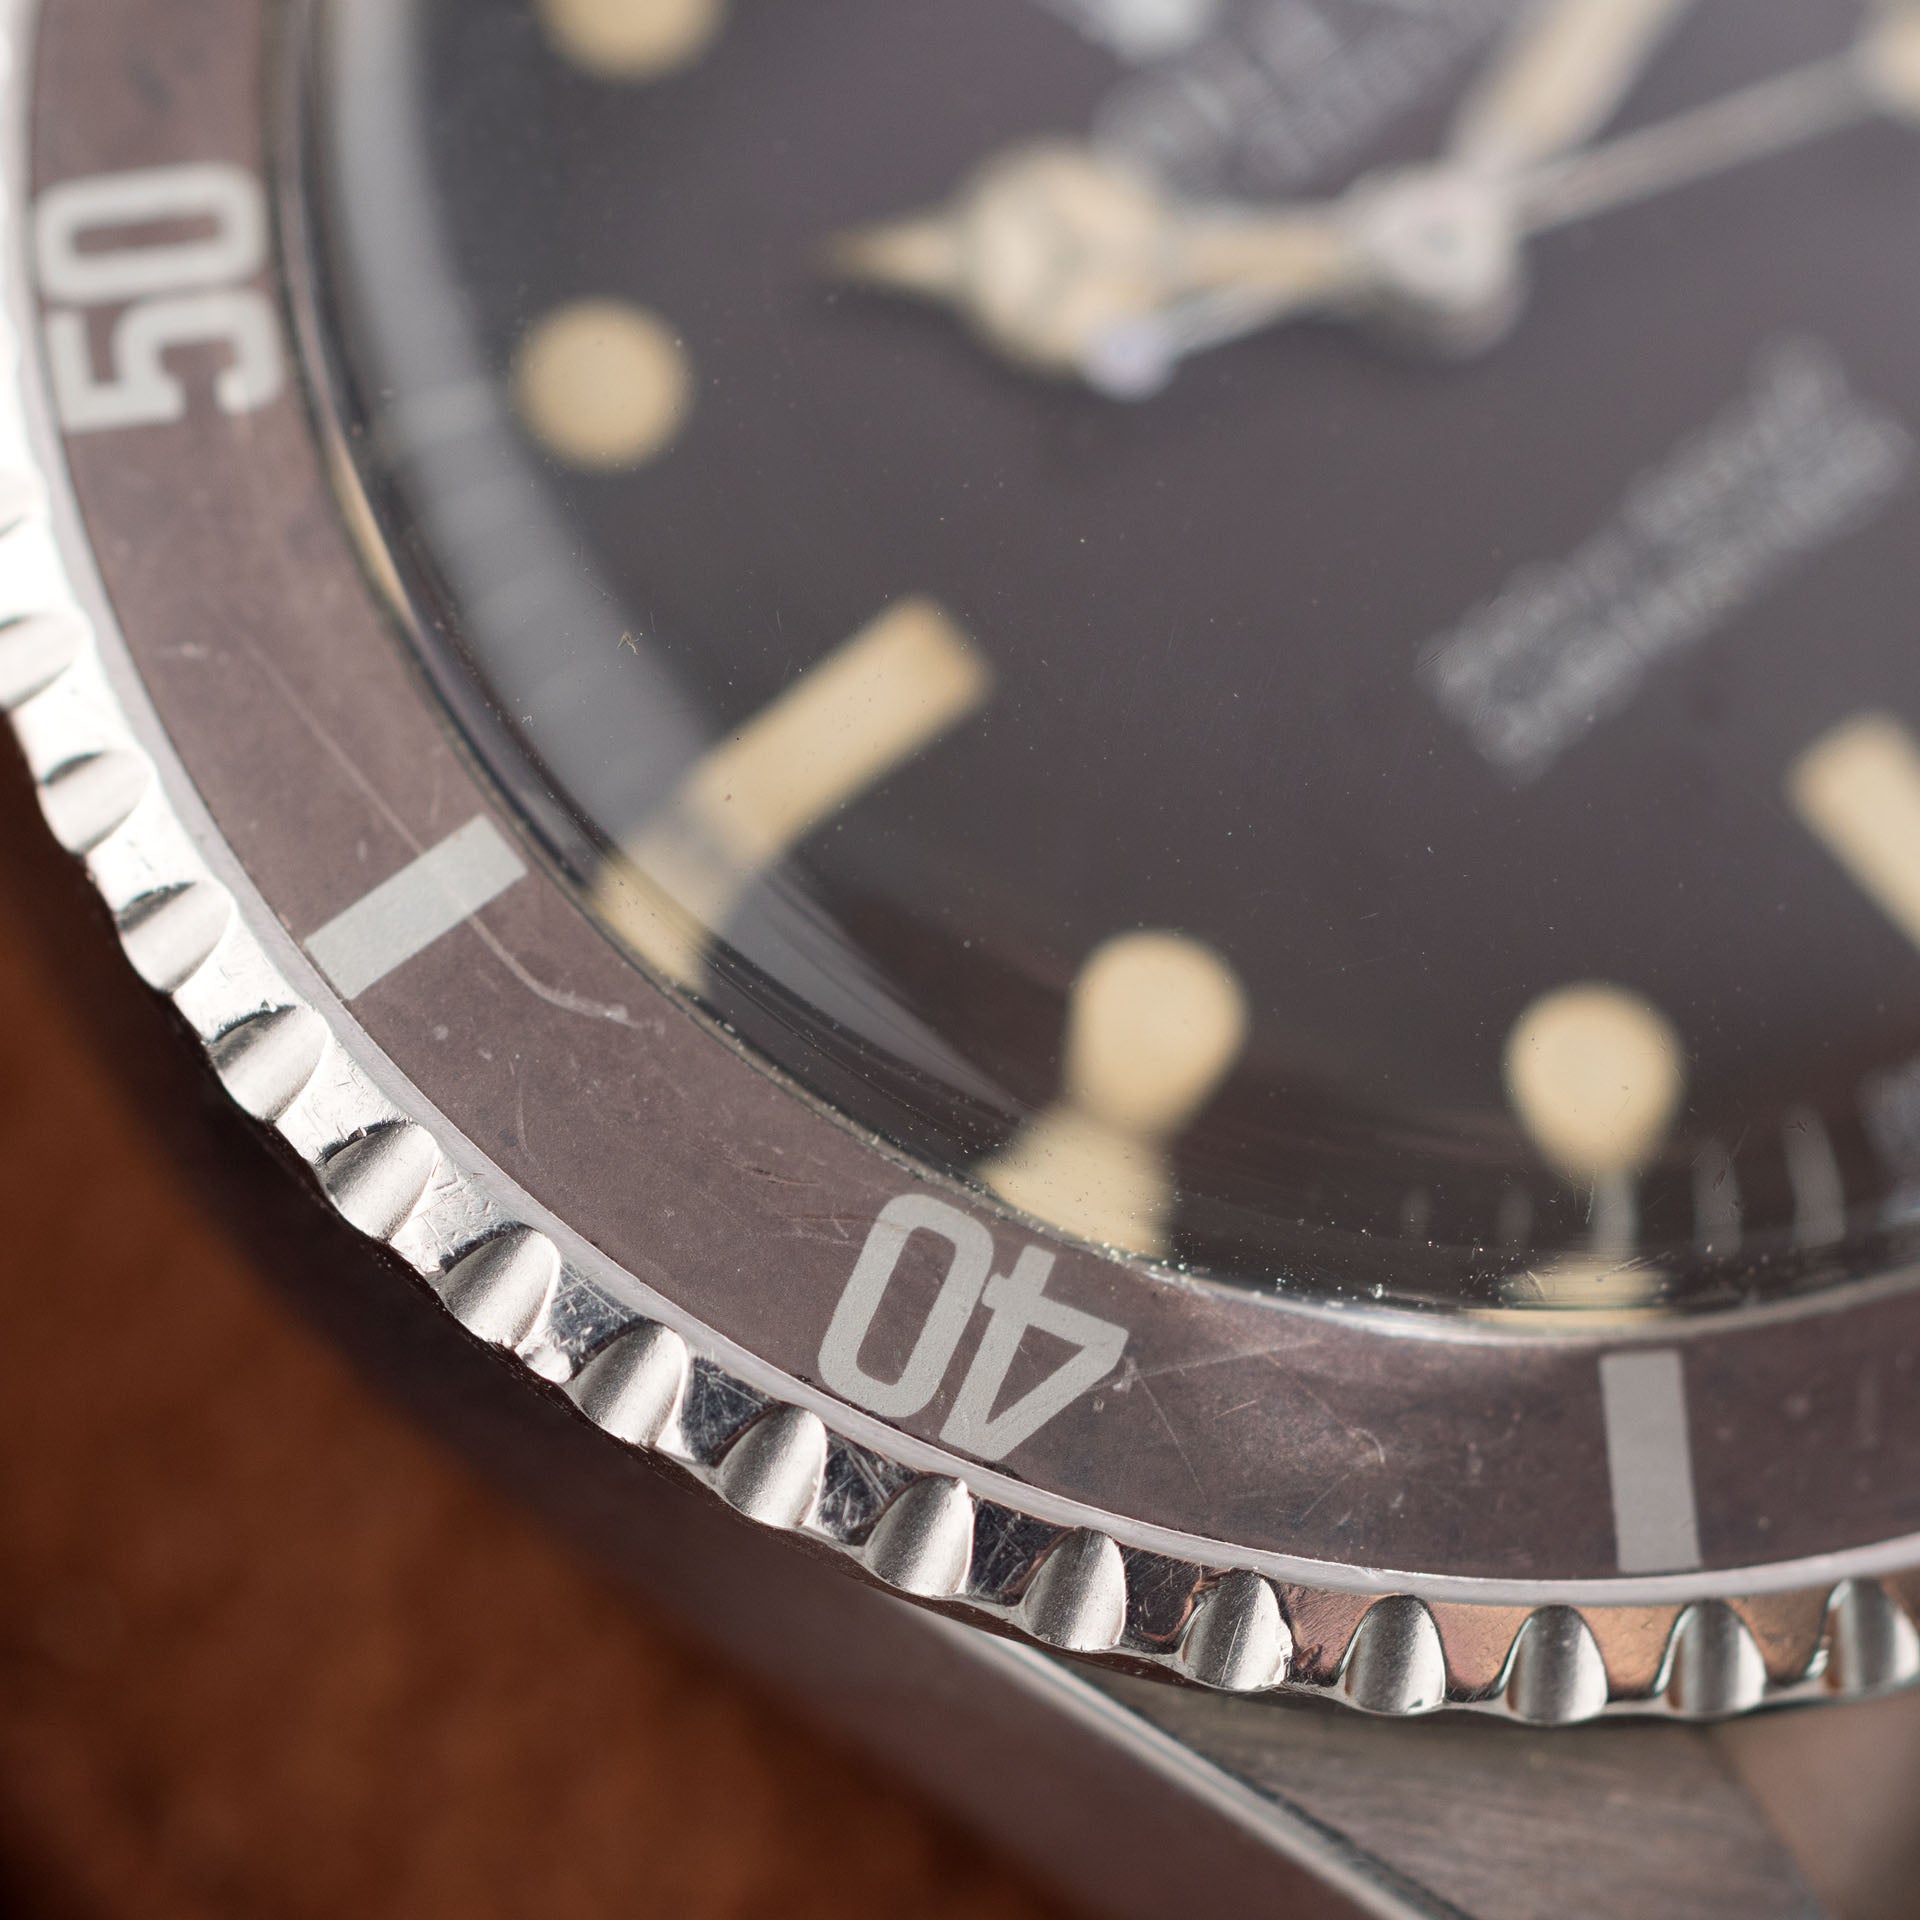 Rolex Submariner 5513 Tropical Meters First Dial with Papers